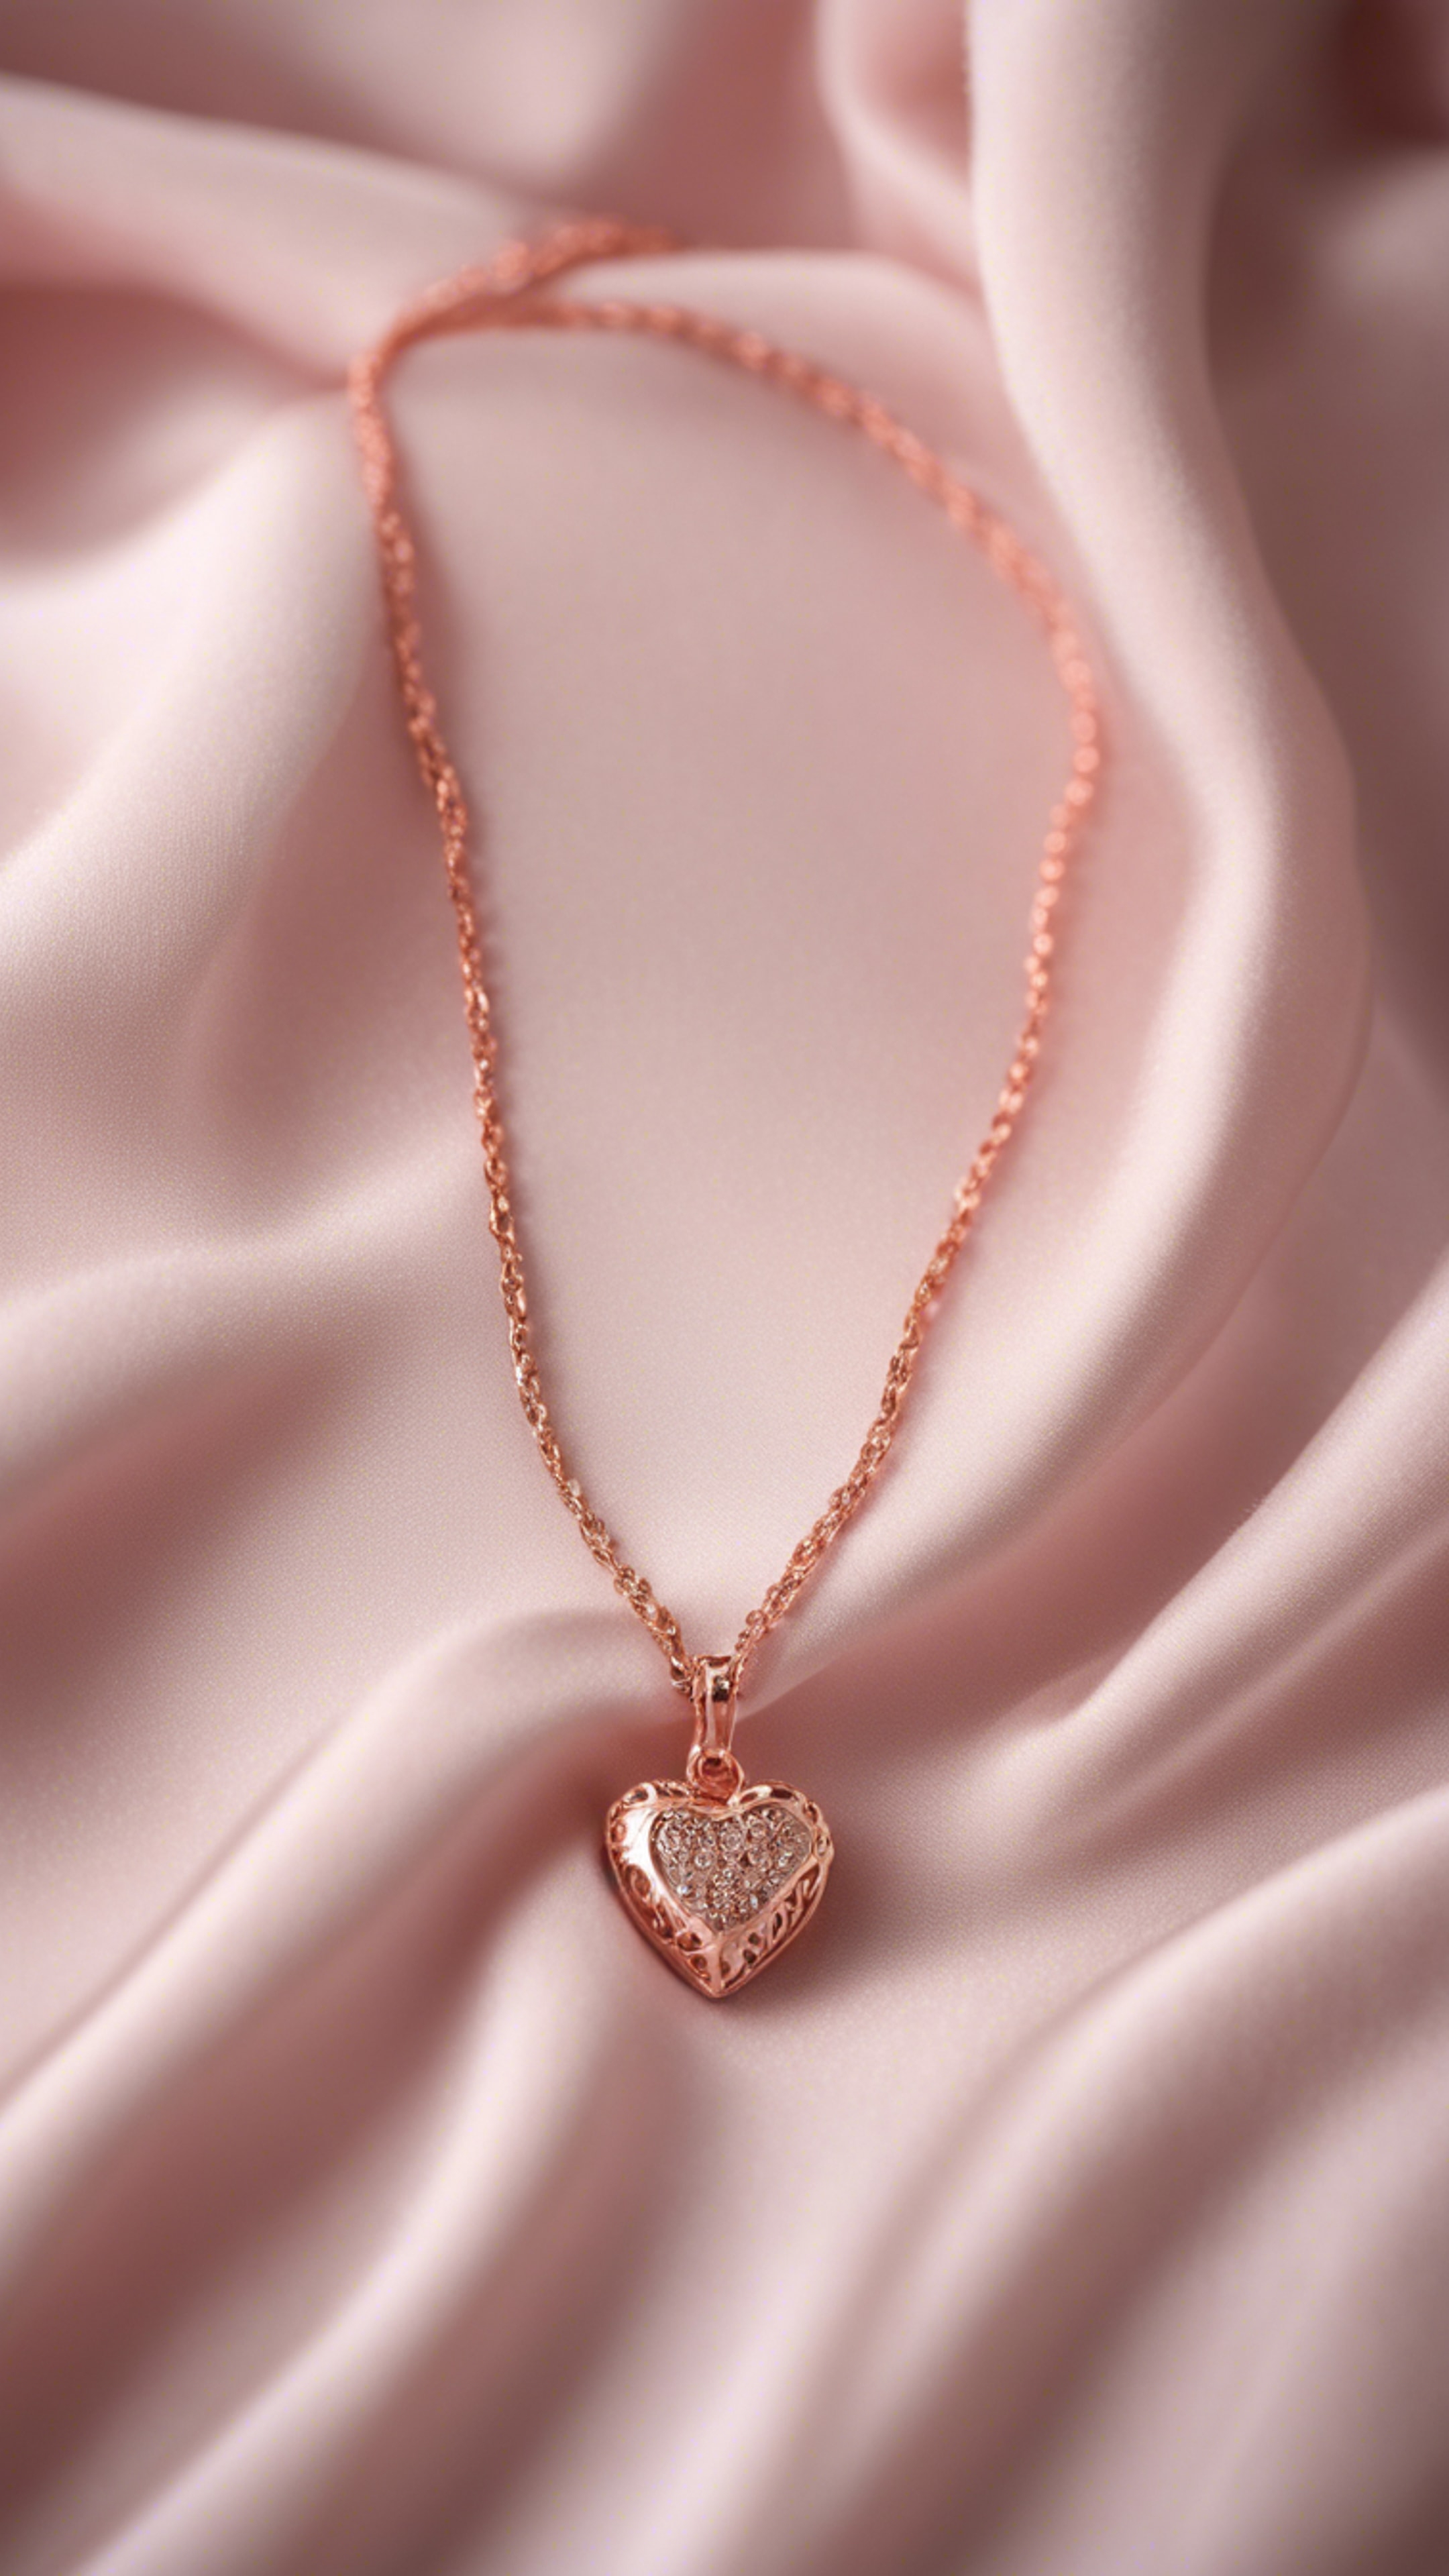 A delicate rose gold chain necklace with a small heart pendant, displayed on a soft pink satin fabric. Шпалери[1bffd5f9a0f0499fae91]